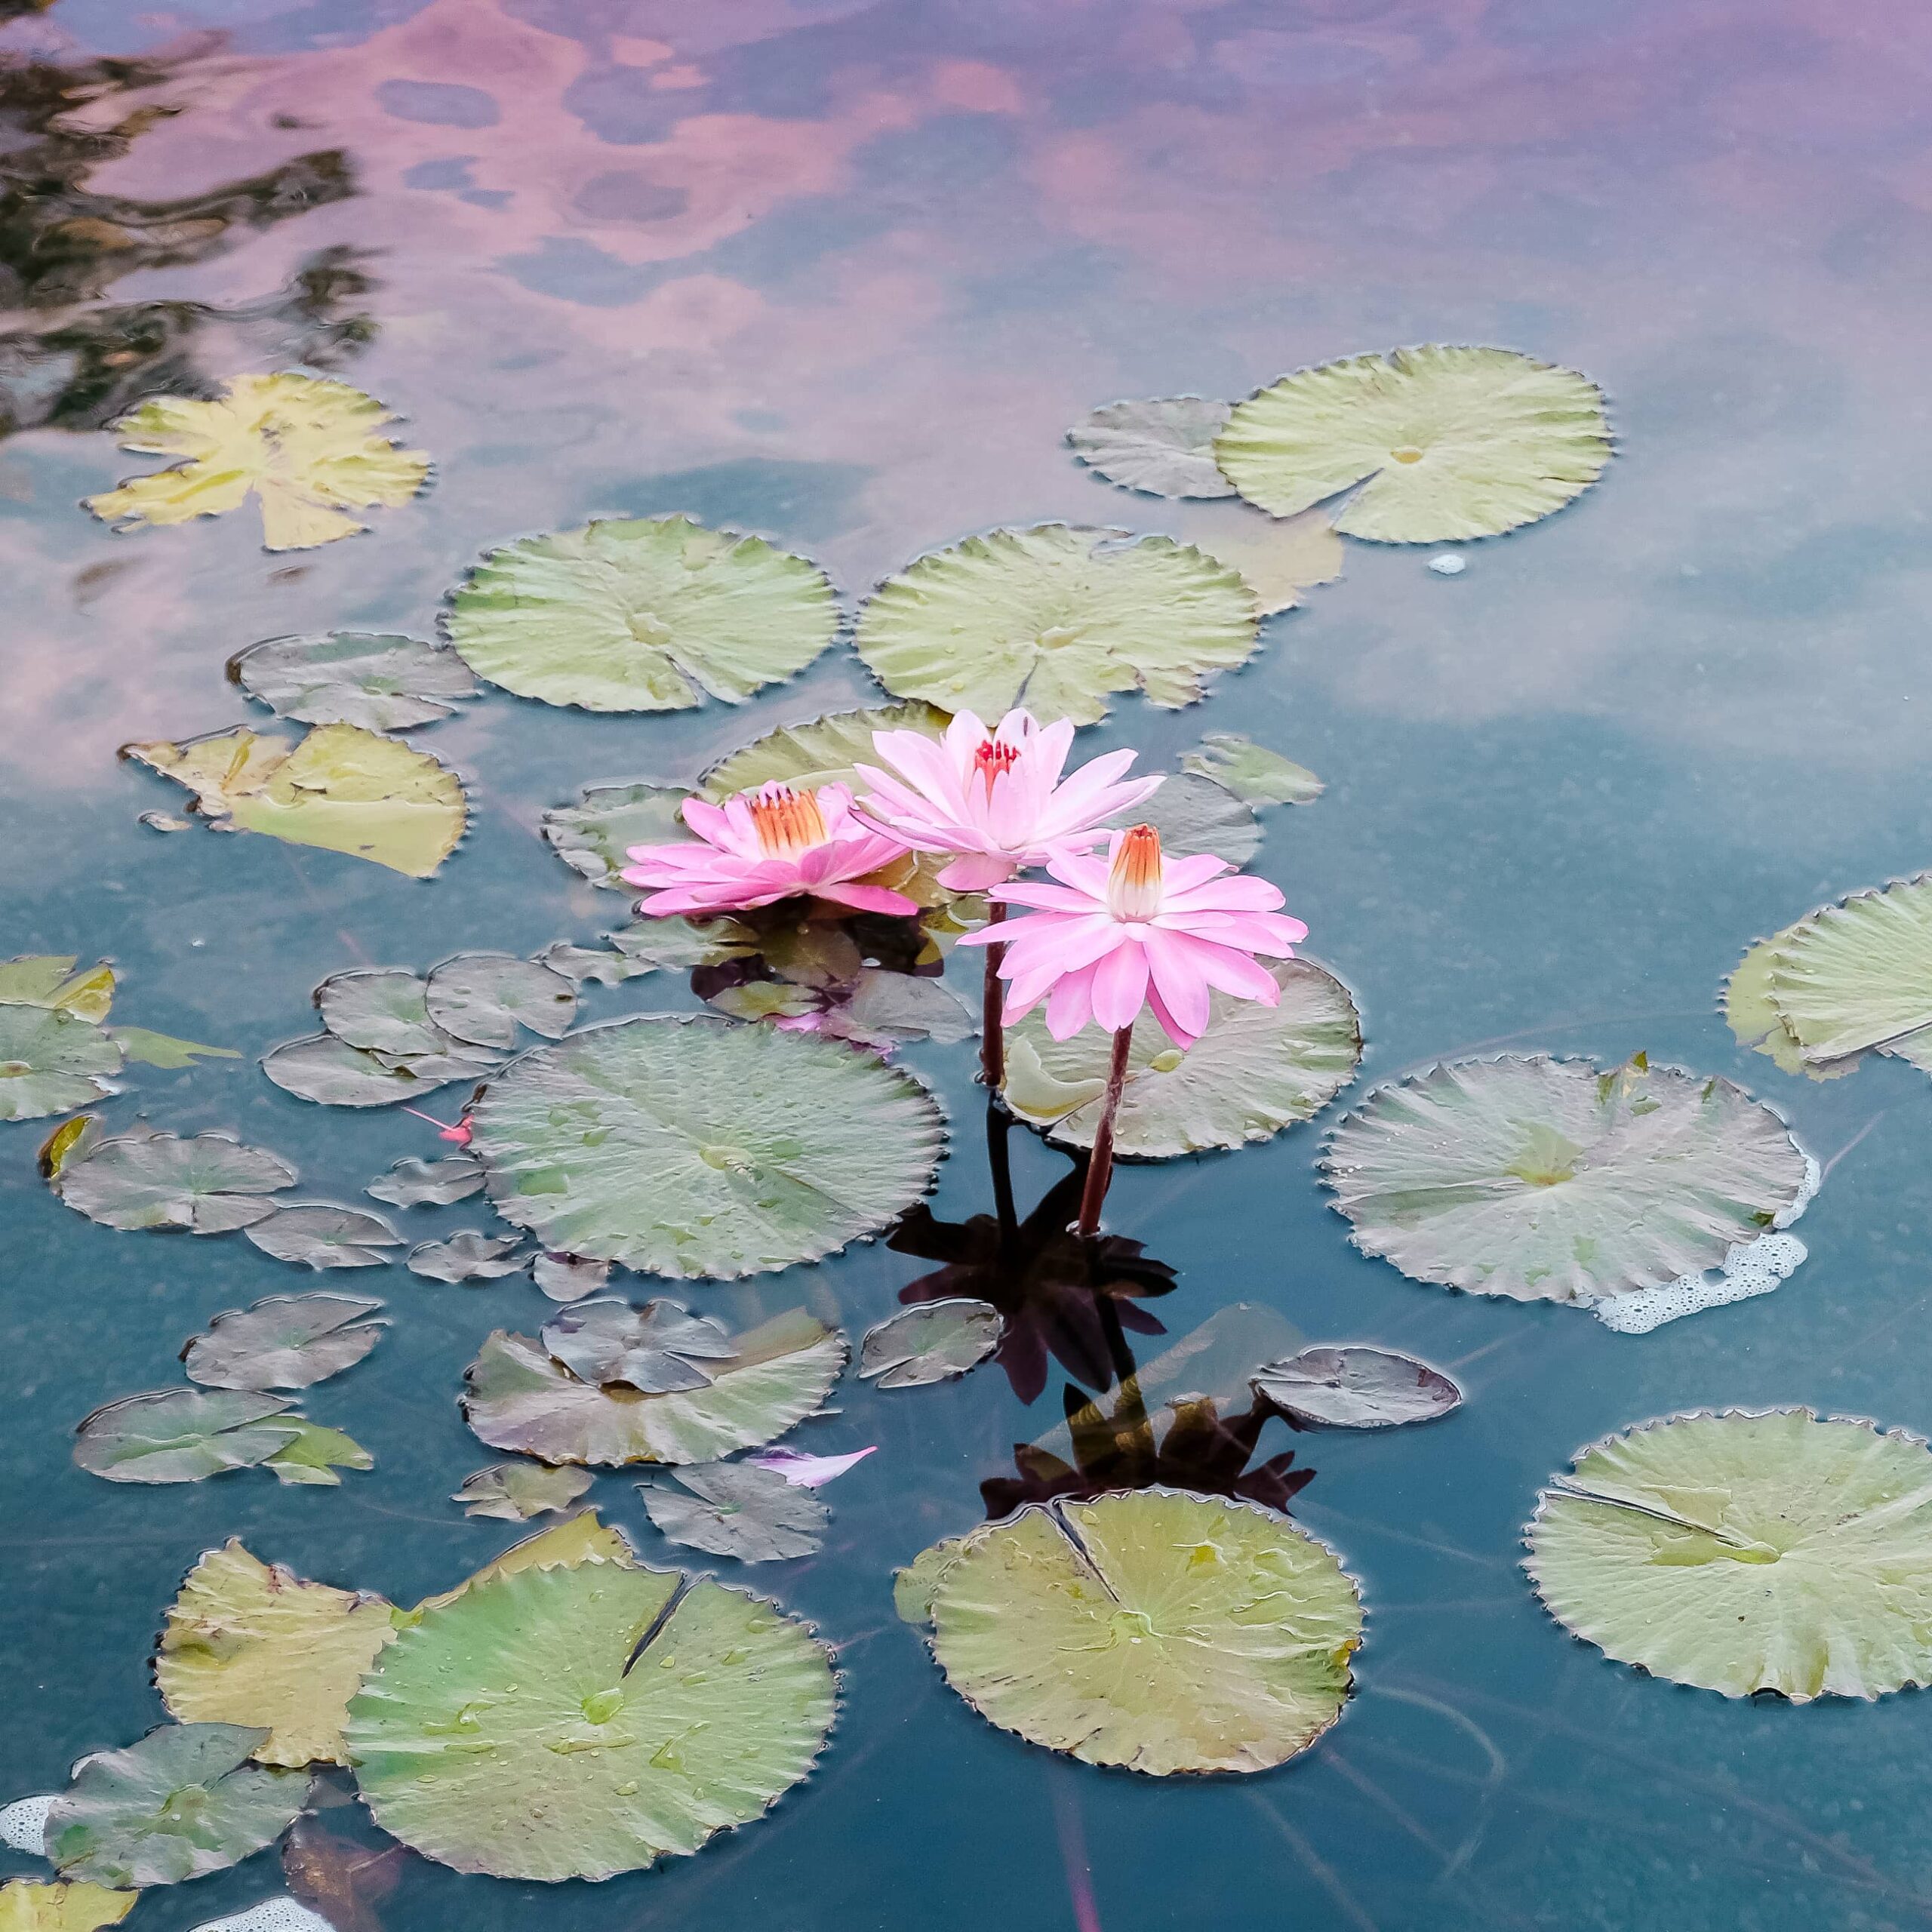 seasonal affective disorder summer, tropical scene lily pads with a melancholy feel